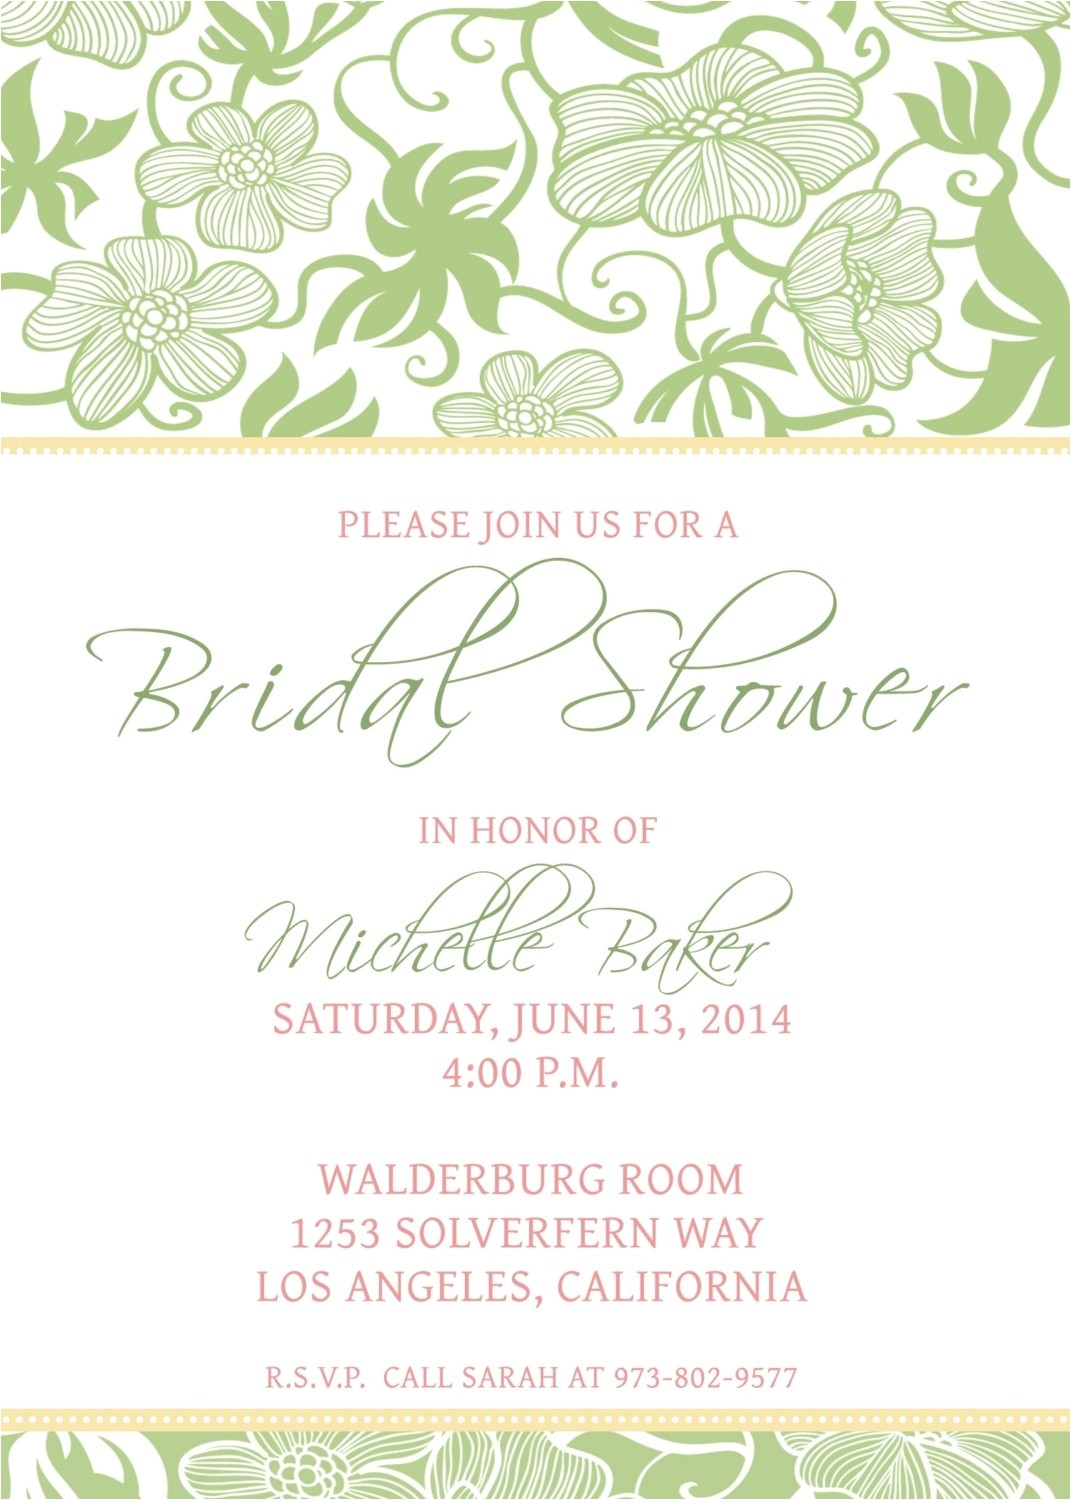 how to make your own wedding invitations template